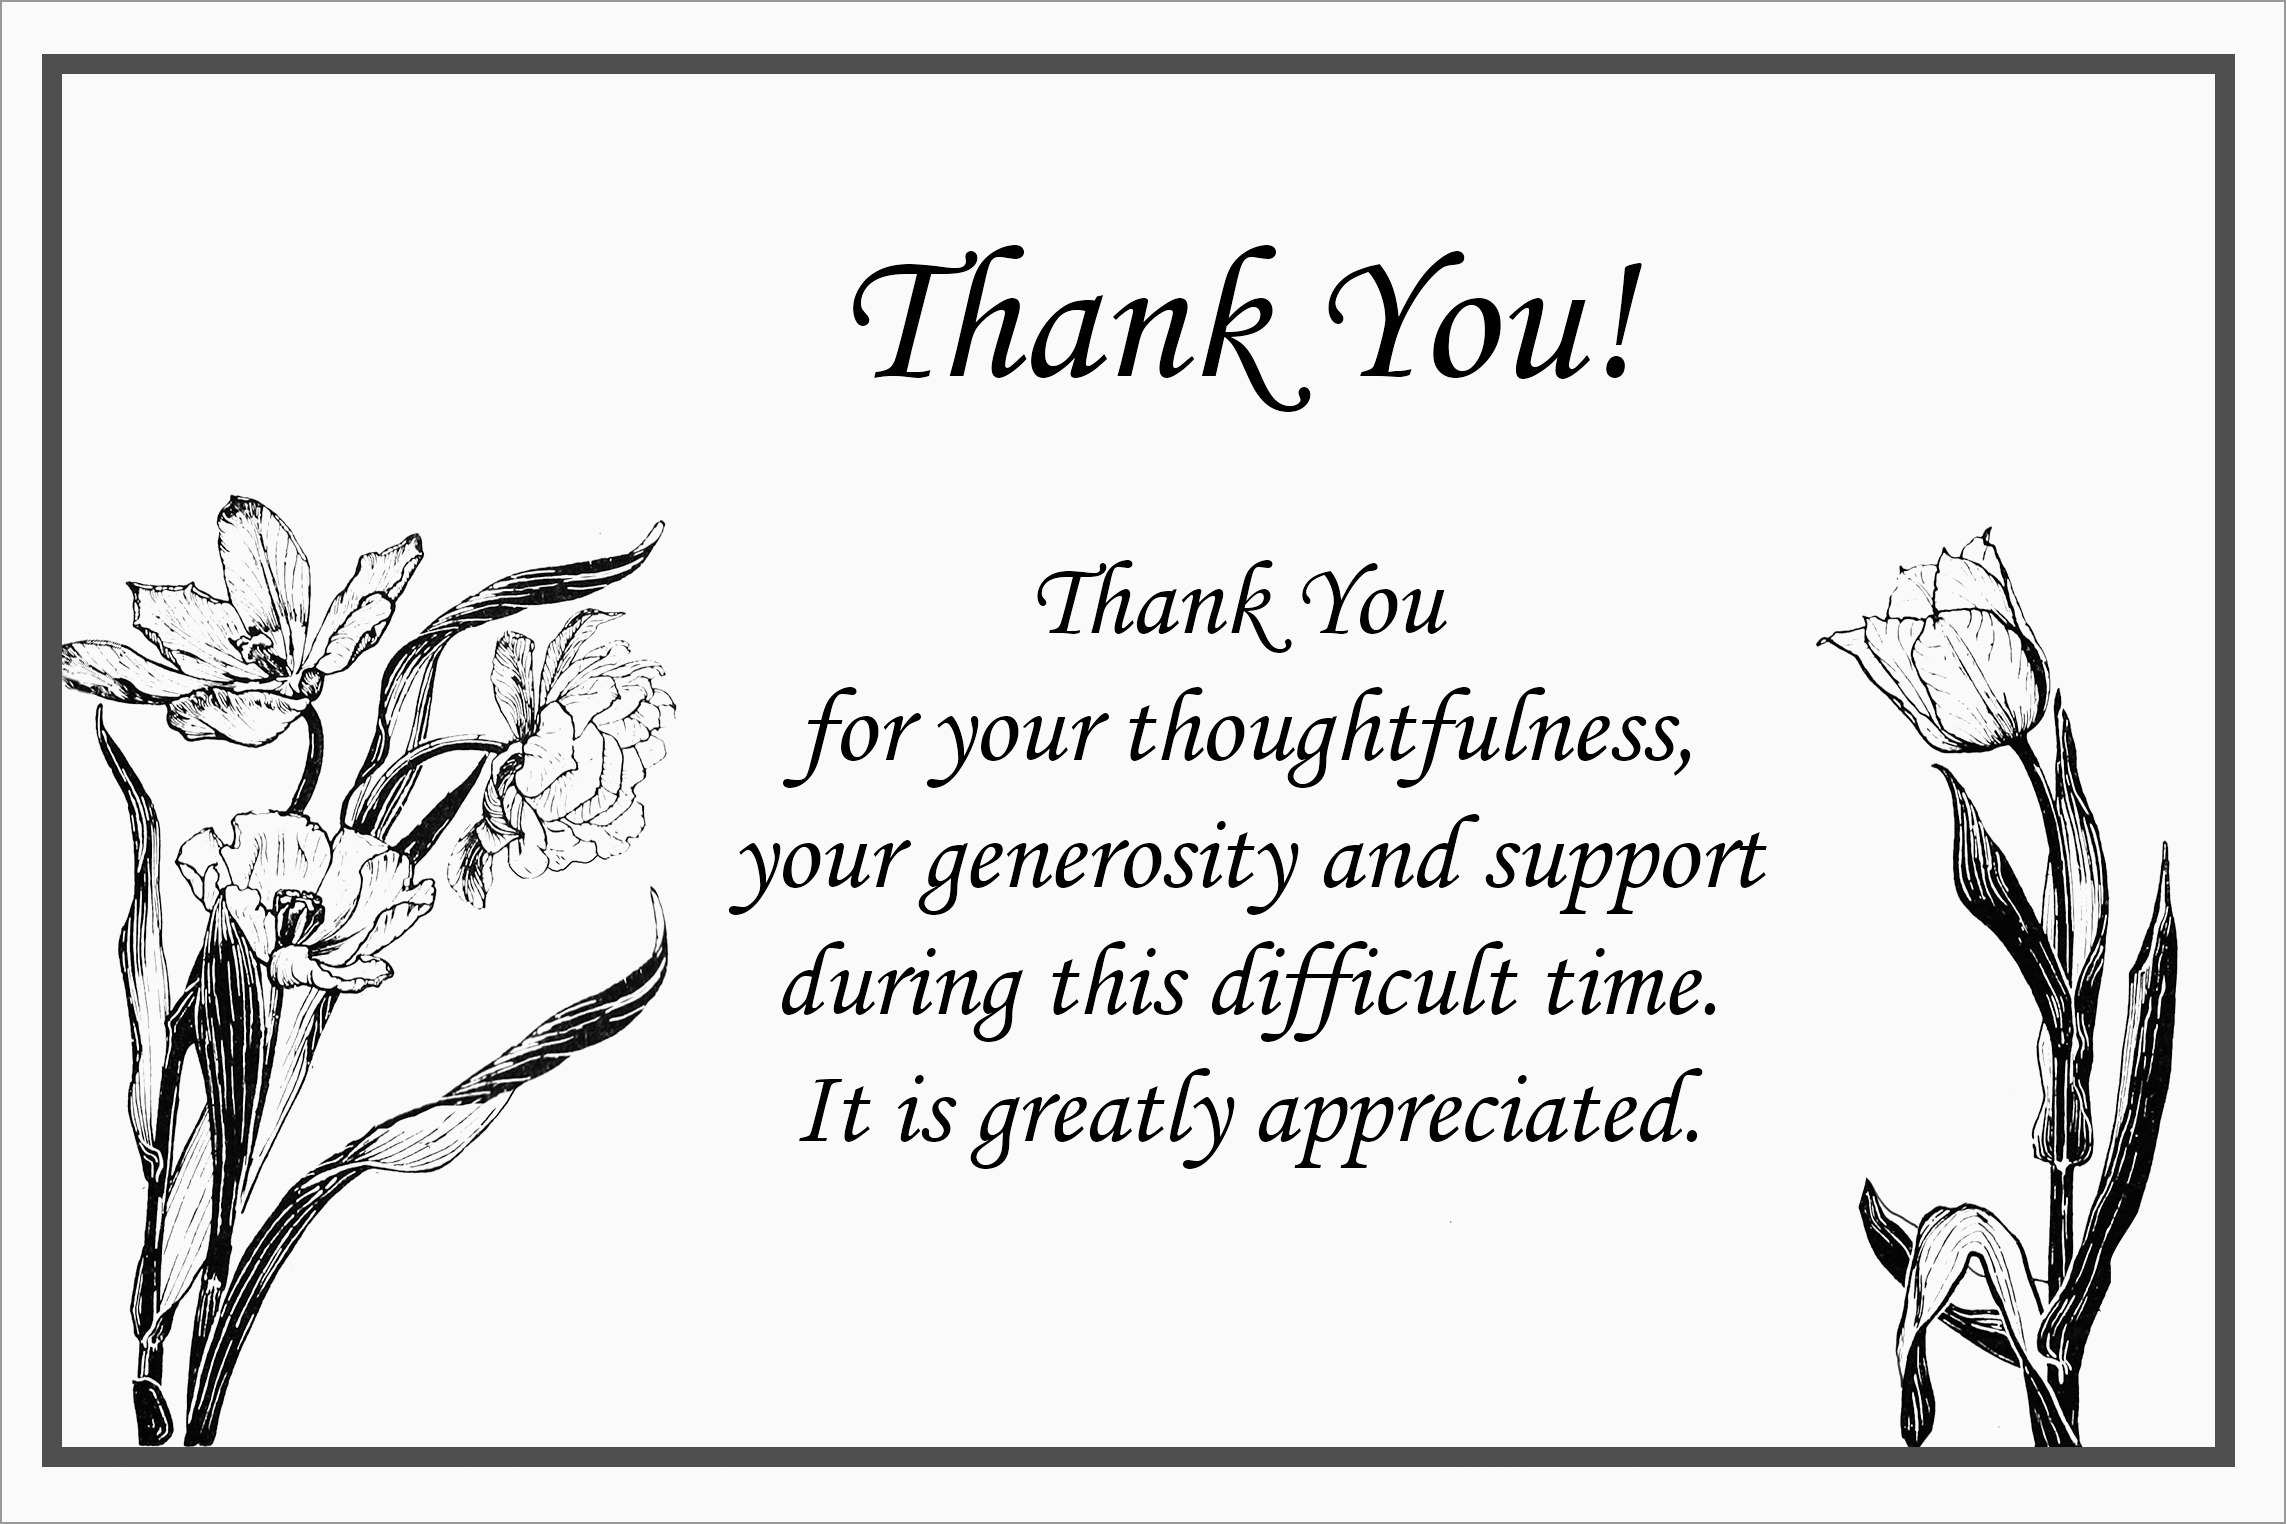 Beautiful Free Funeral Thank You Cards Templates | Best Of Template - Thank You Sympathy Cards Free Printable